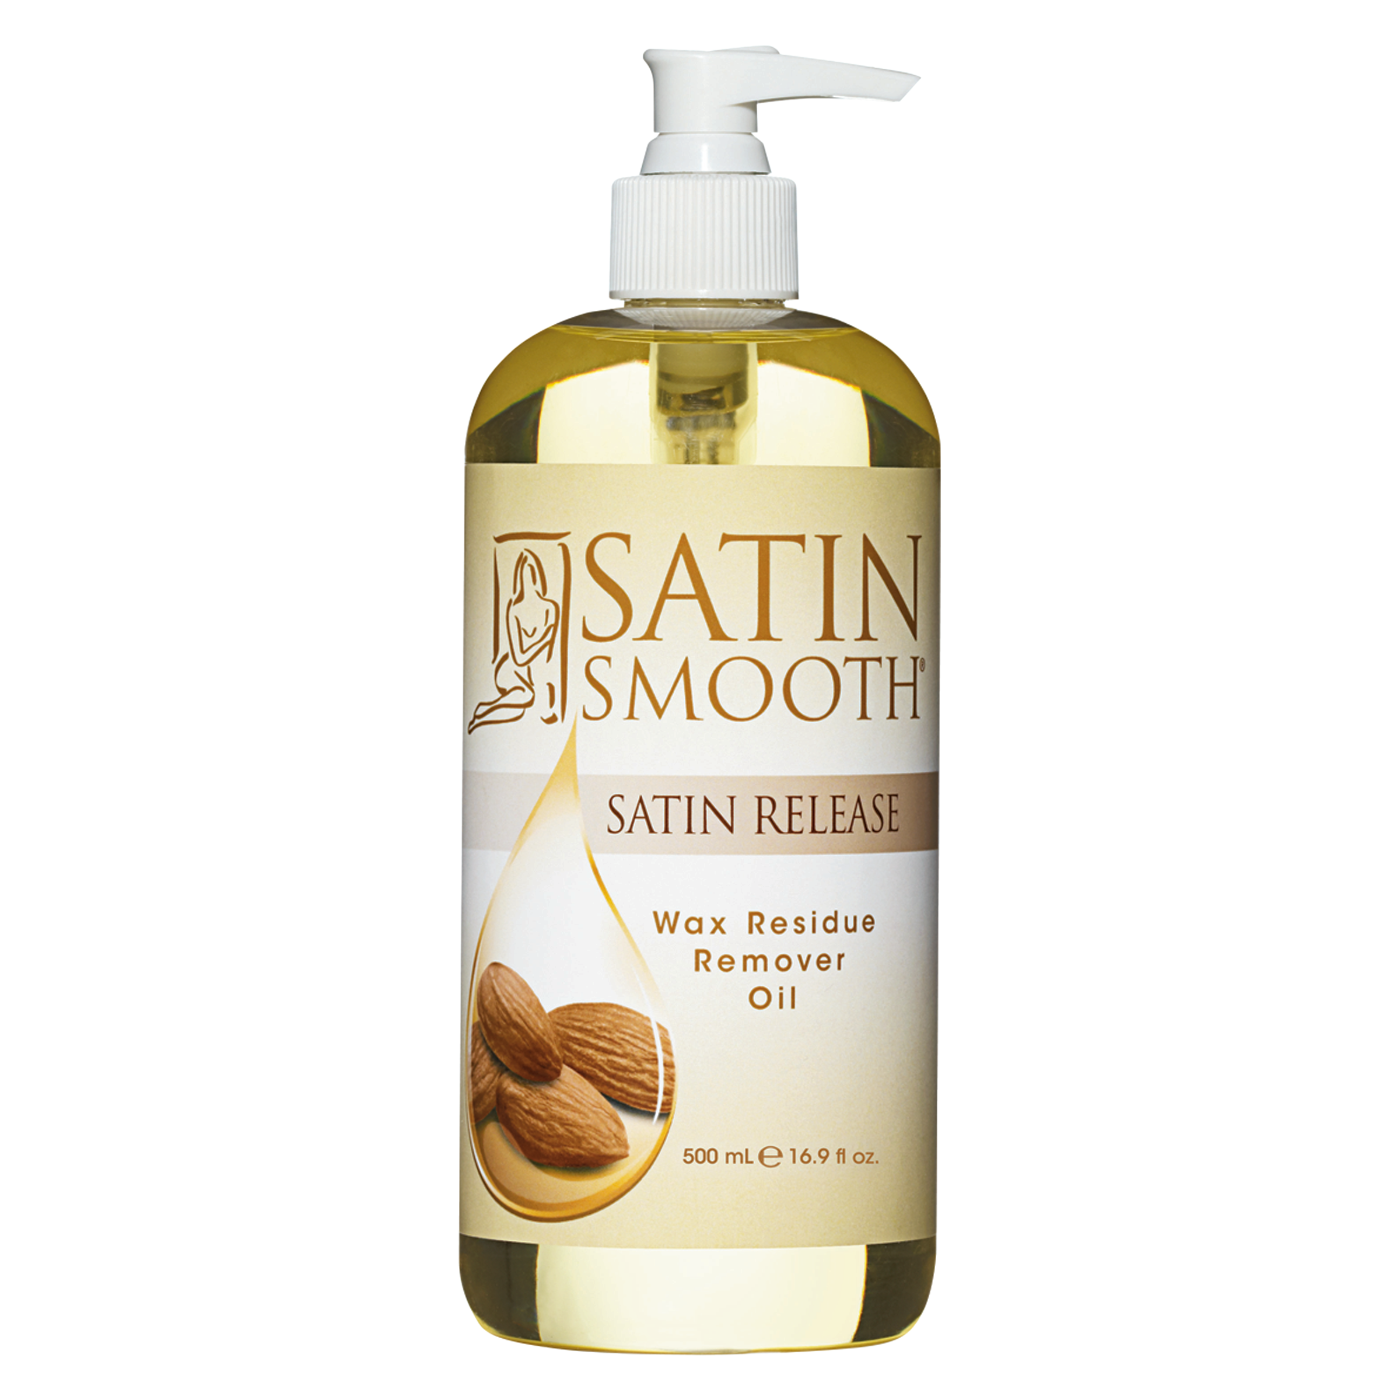 Satin Release® Wax Residue Remover Oil